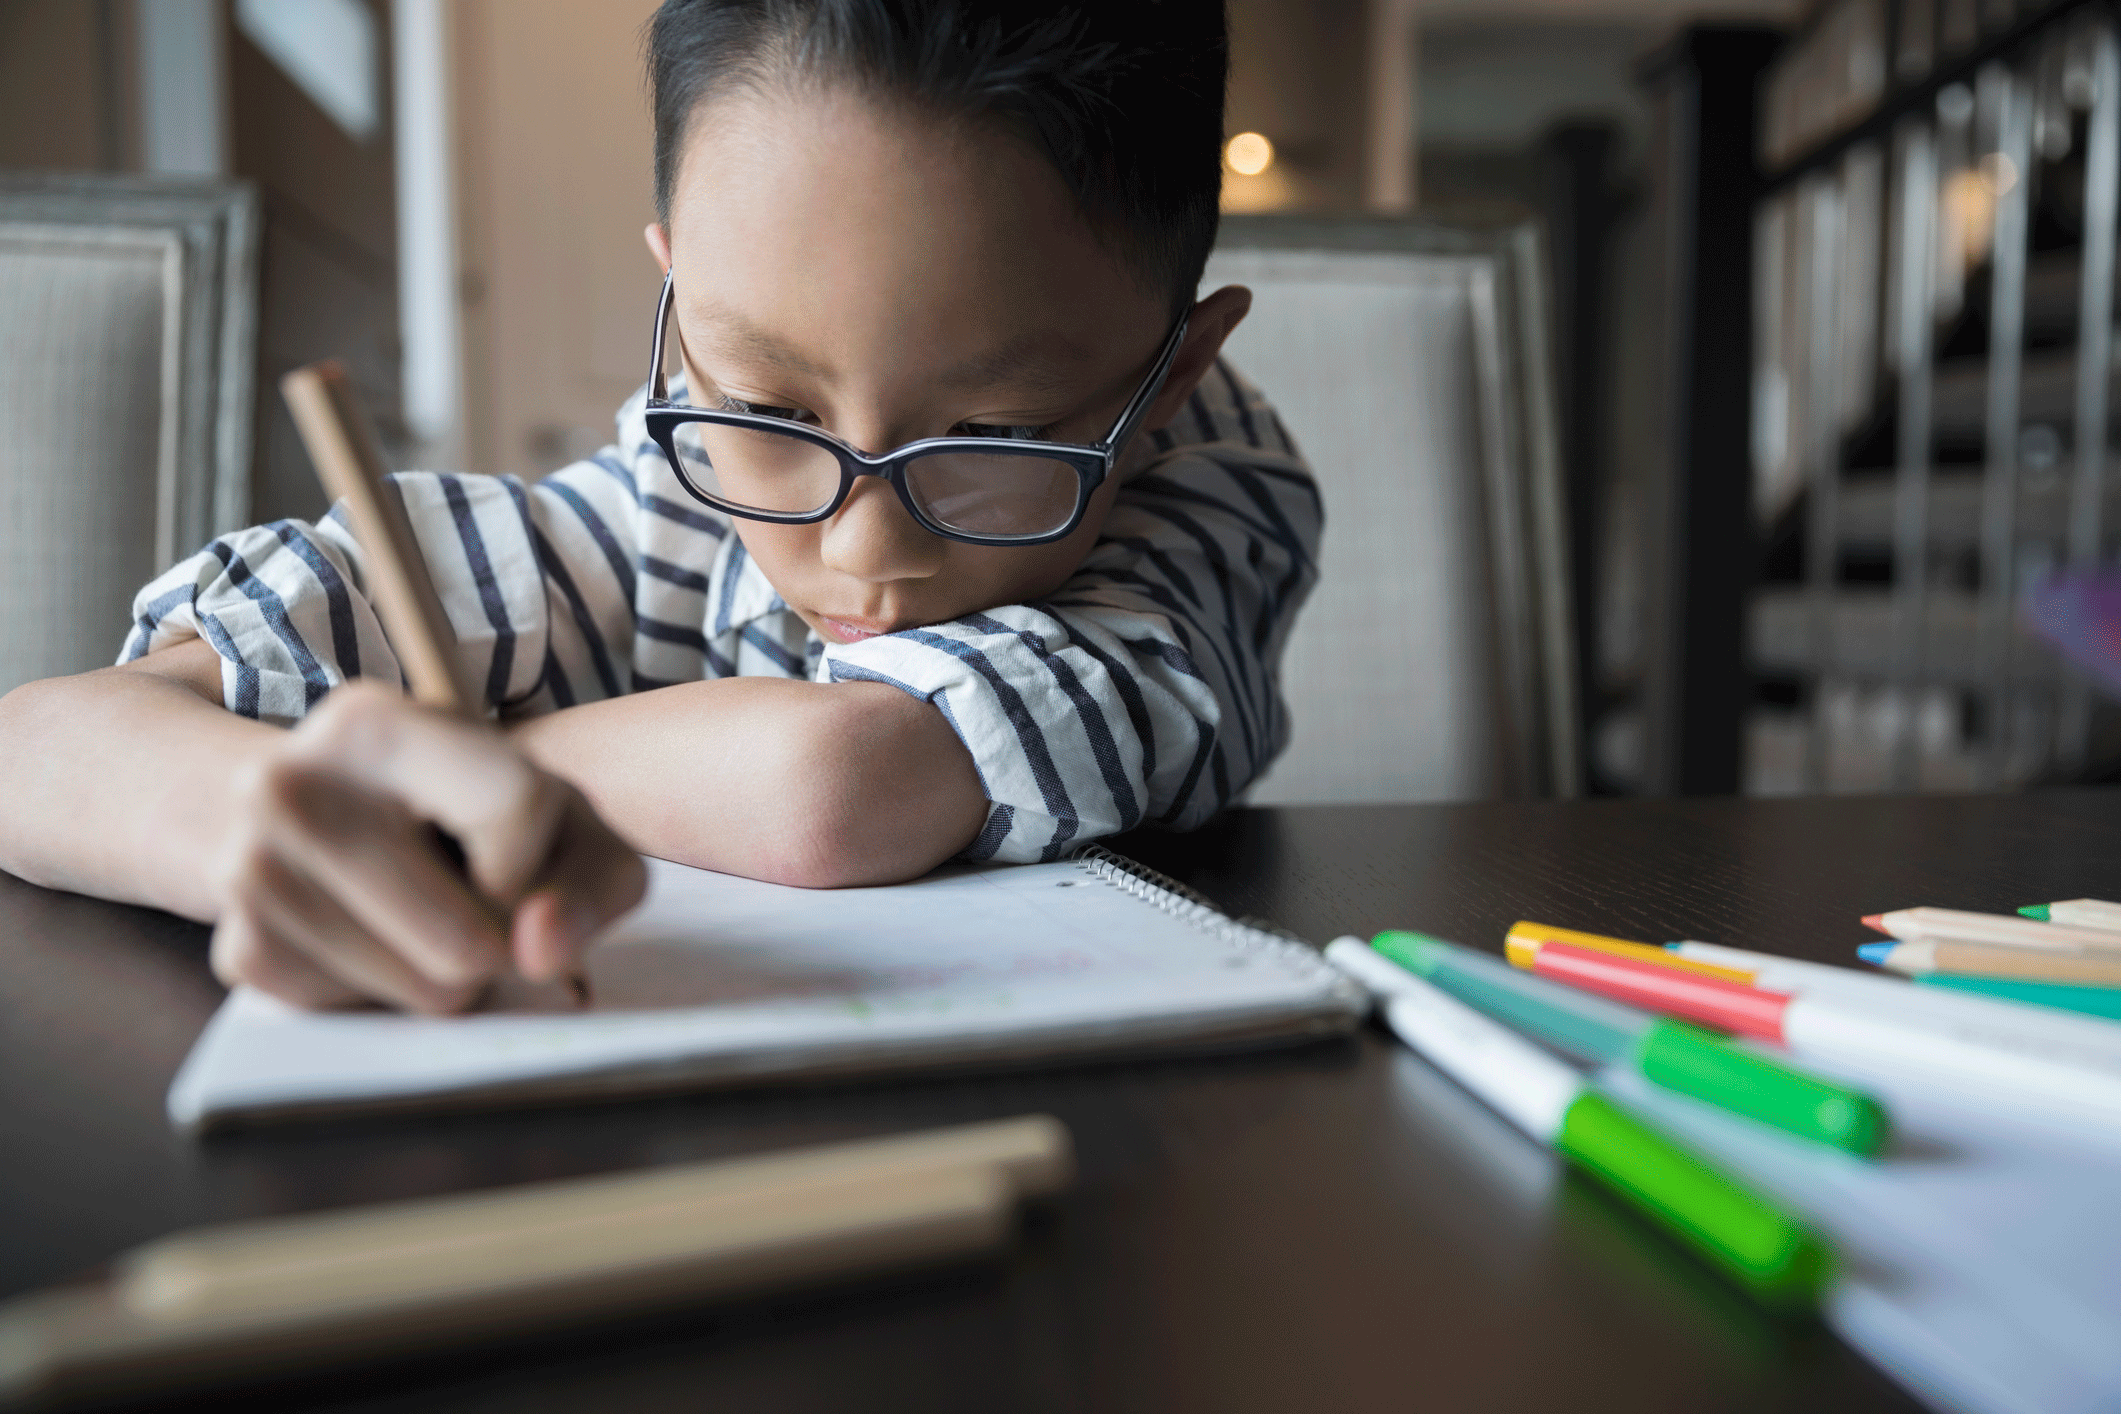 is homework harmful or helpful to student learning